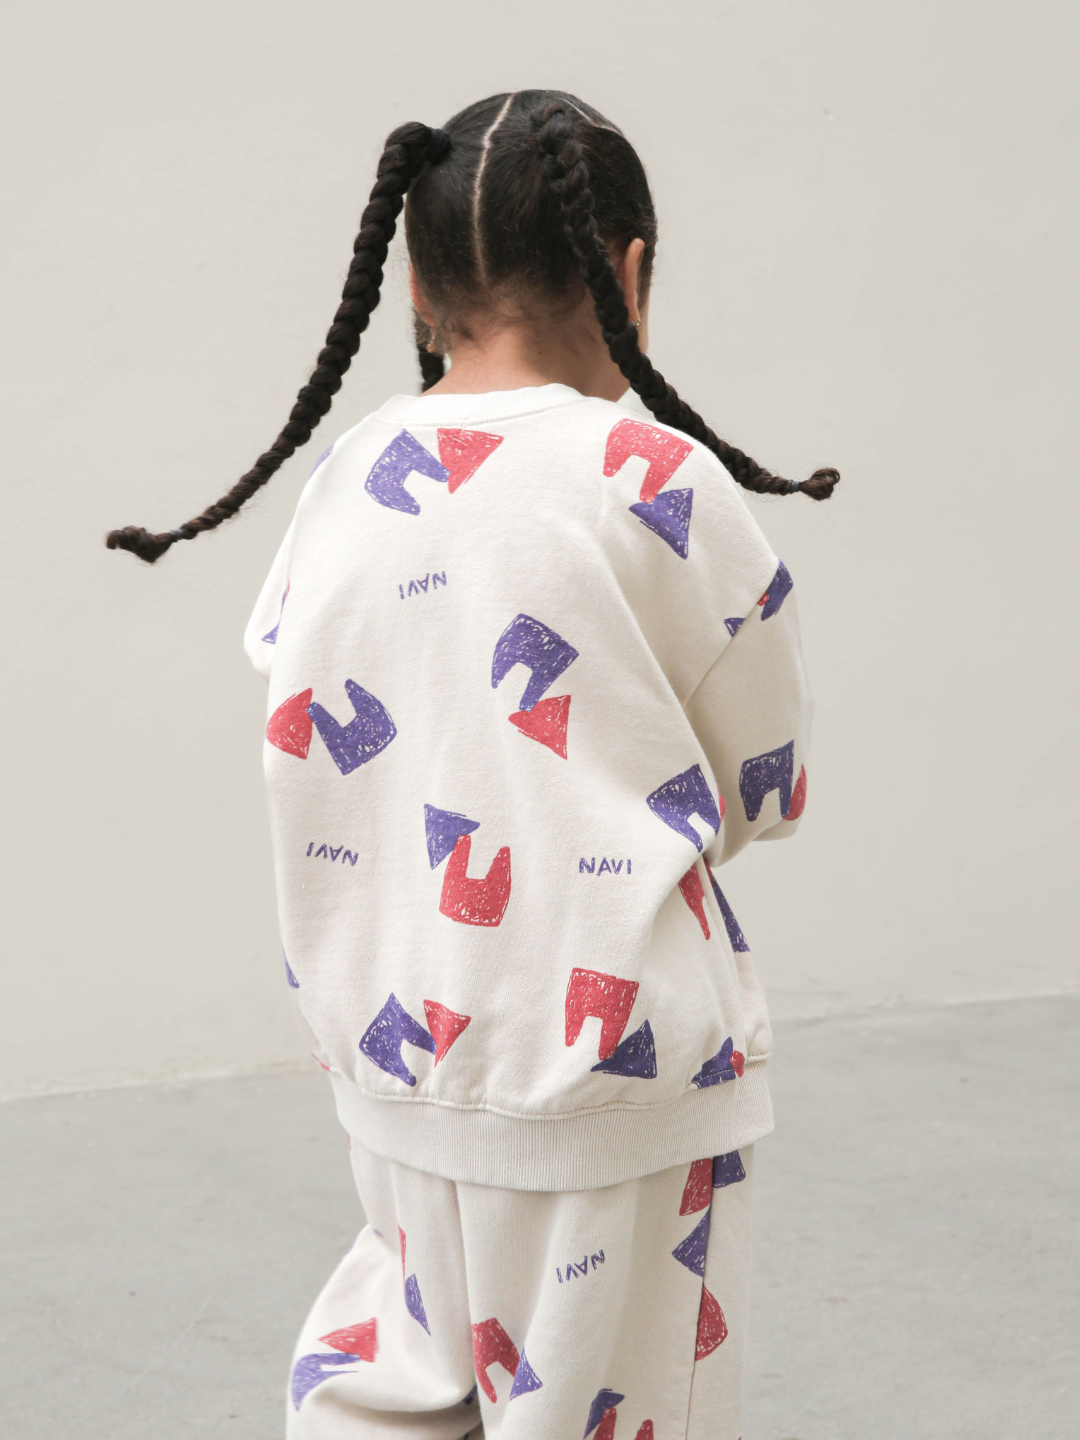 Back view of child wearing beige crewneck sweatshirt with an all over pattern of red and purple shapes and the brand name Navi, with matching sweatpants. She stands on a beige background and wears her hair in three long braids.